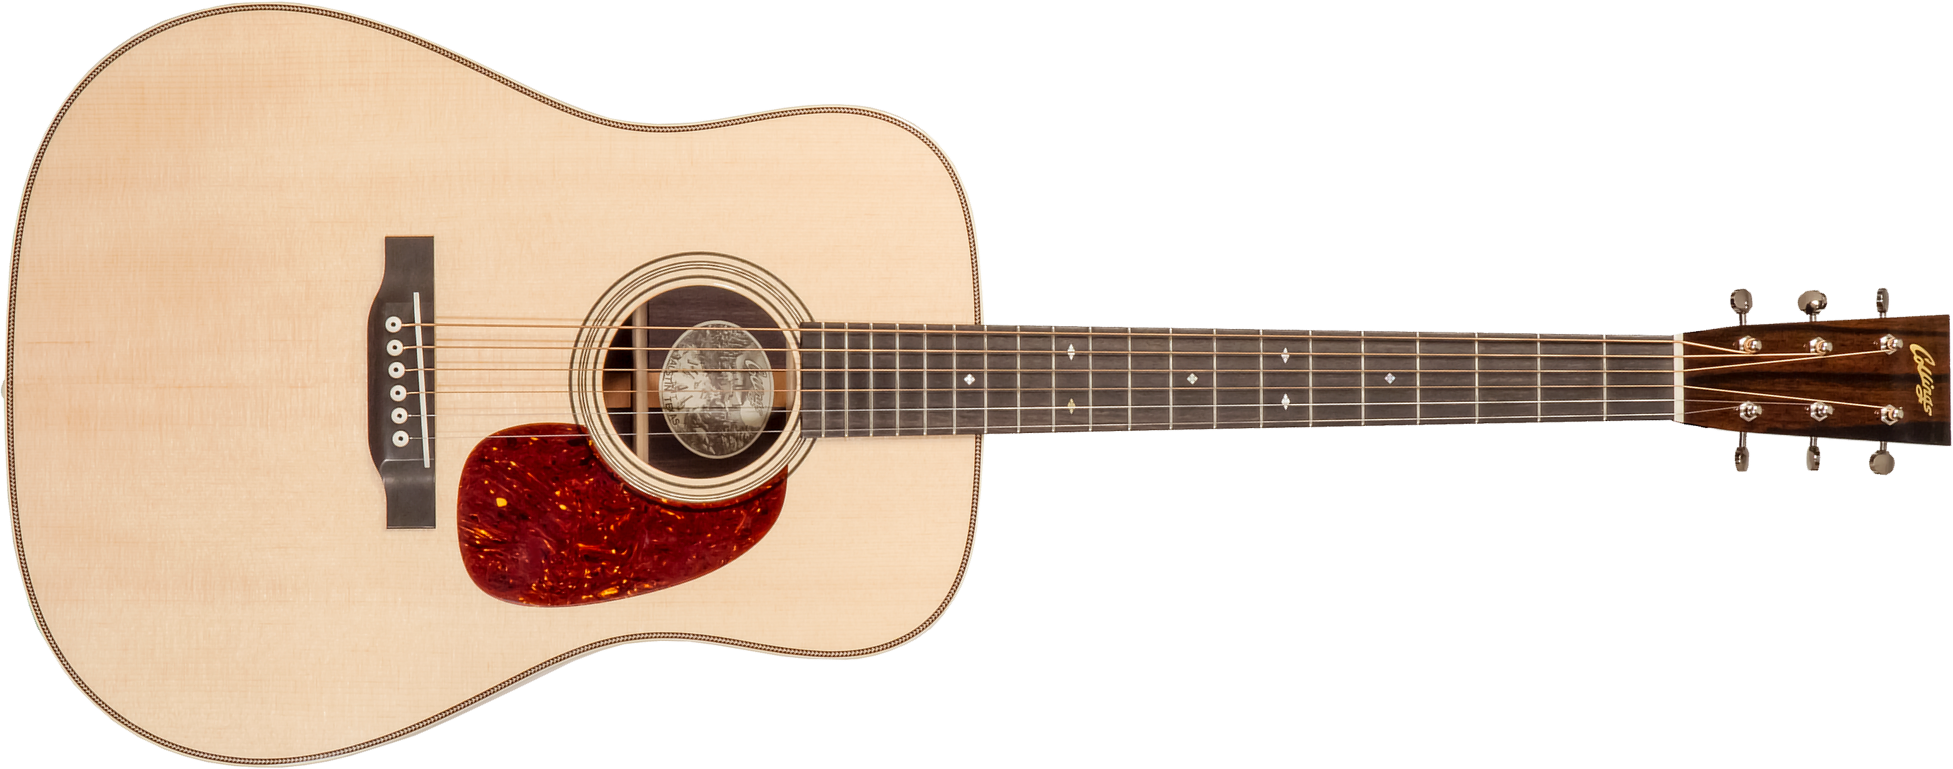 Collings D2h Custom Dreadnought Epicea Palissandre Eb #33756 - Natural High Gloss - Westerngitaar & electro - Main picture